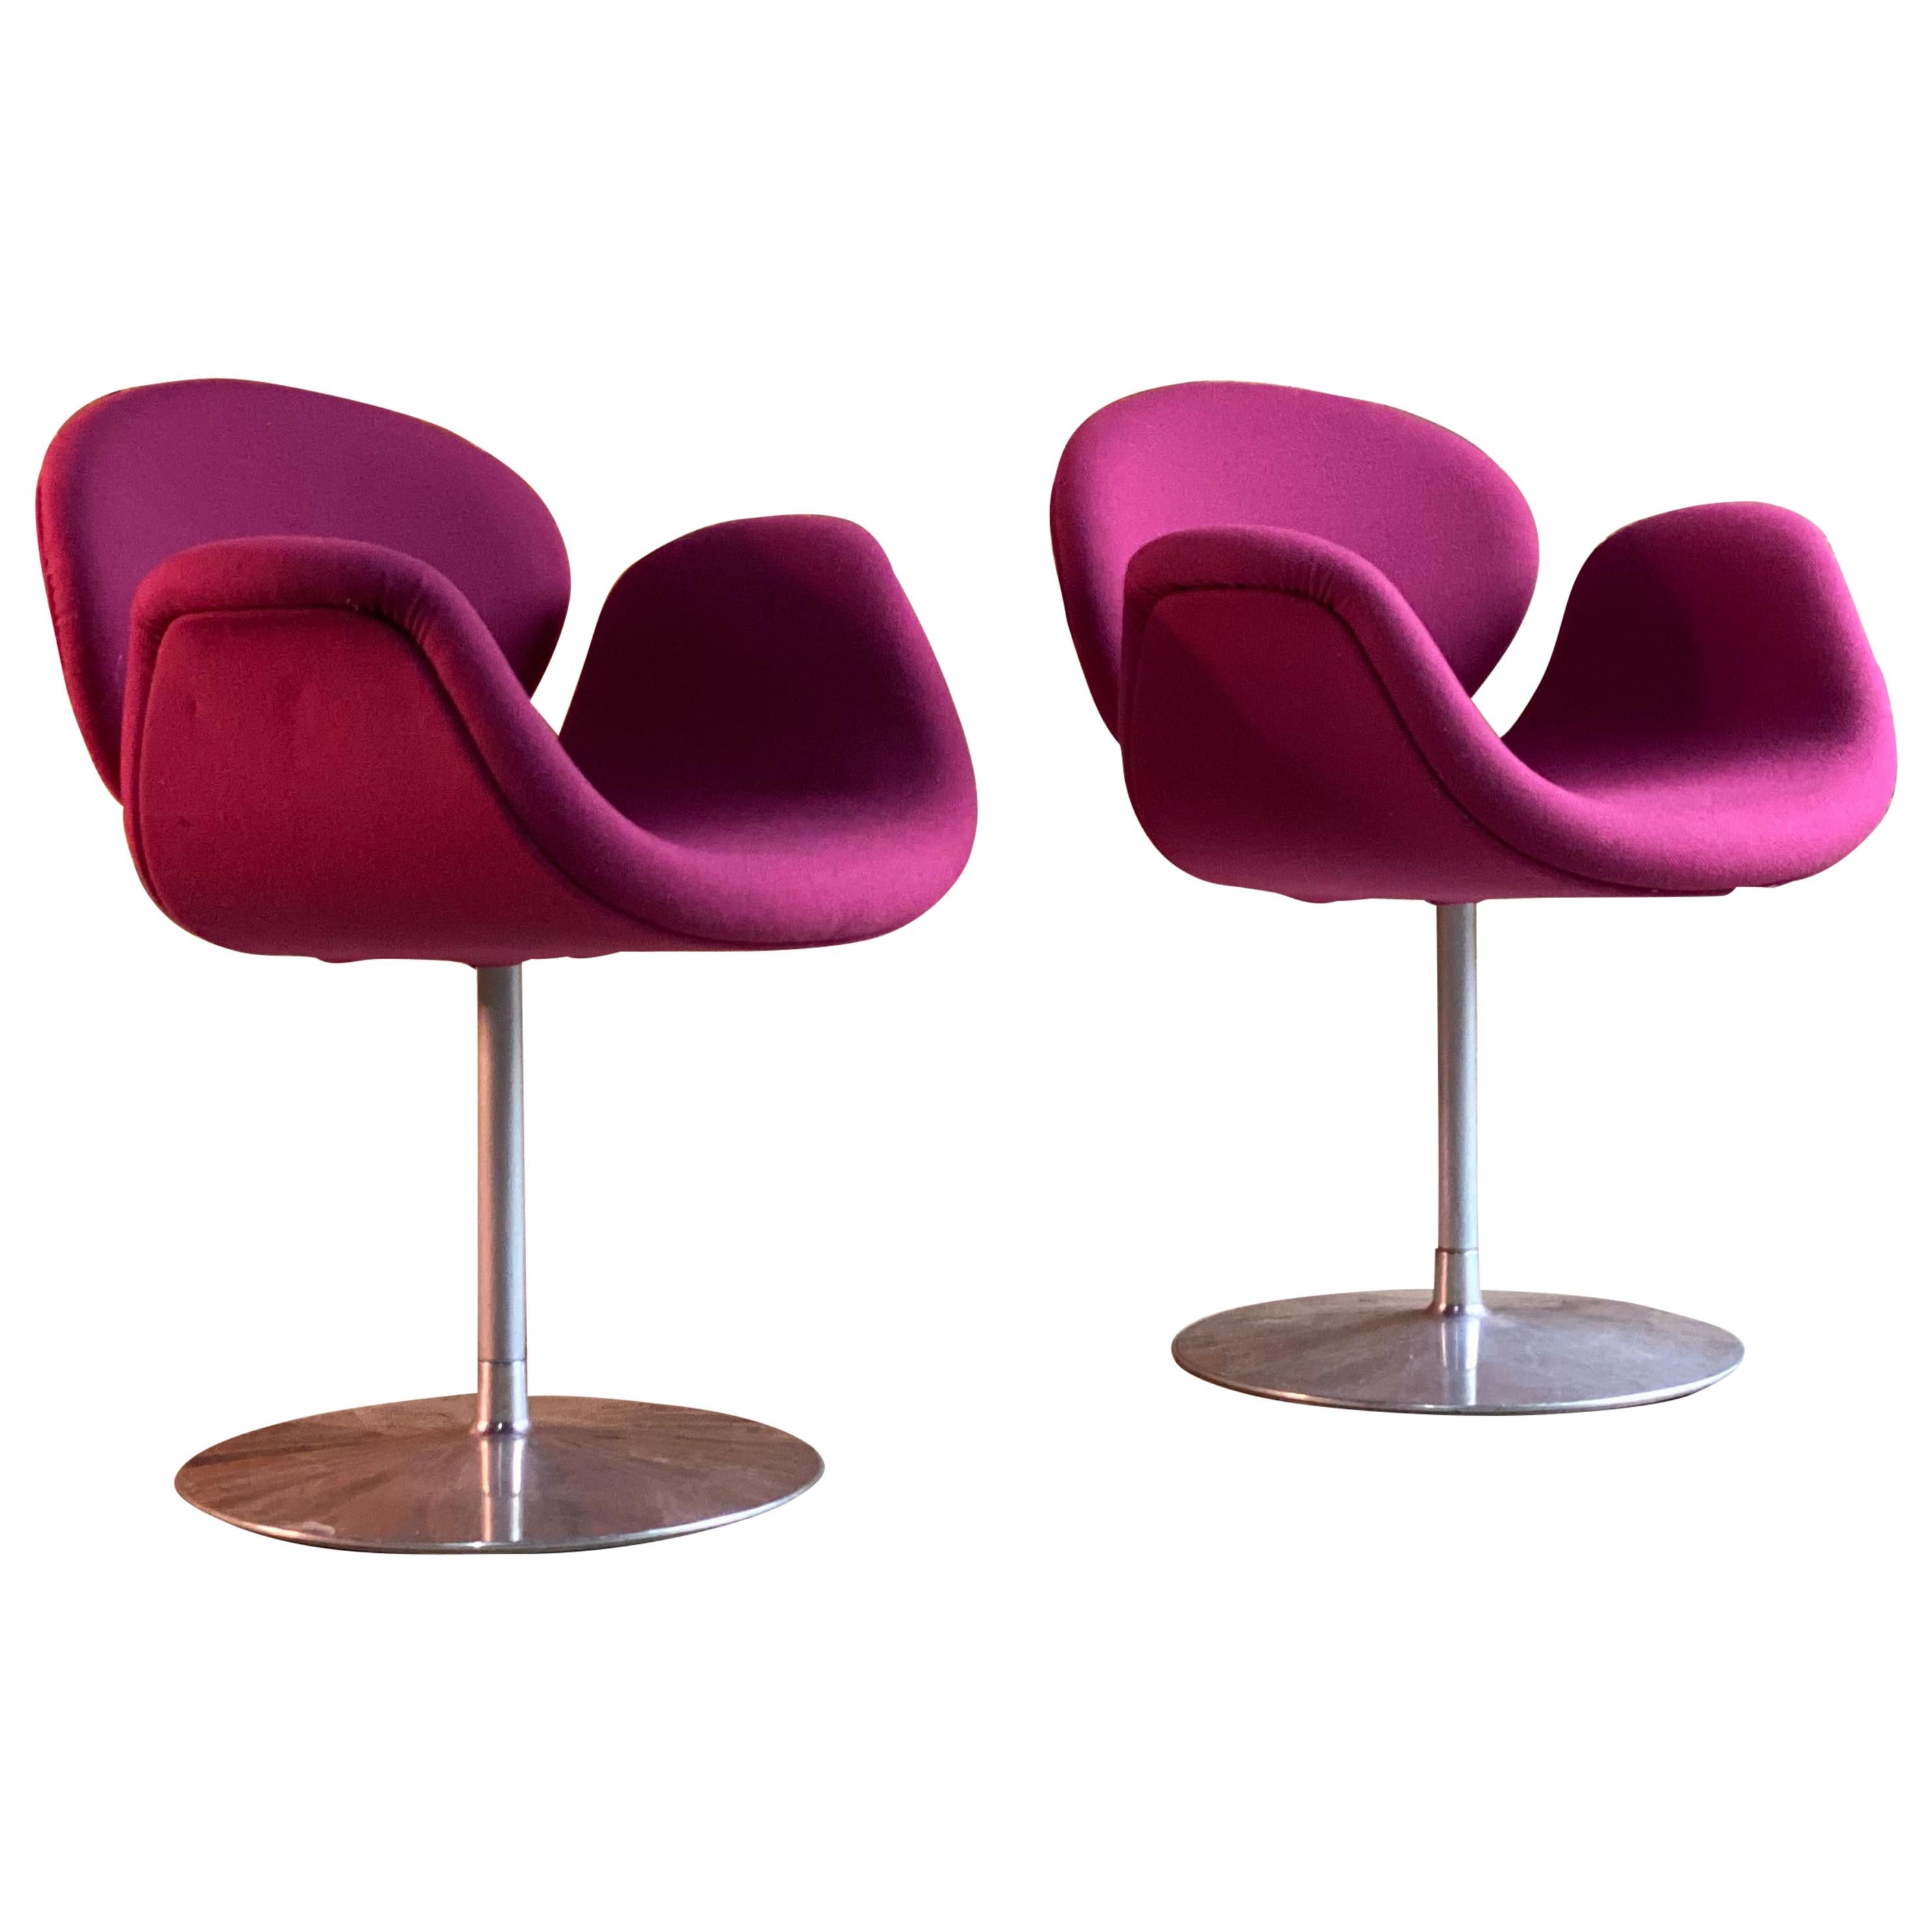 Tulip Chairs by Pierre Paulin by Artifort Netherlands, circa 2000